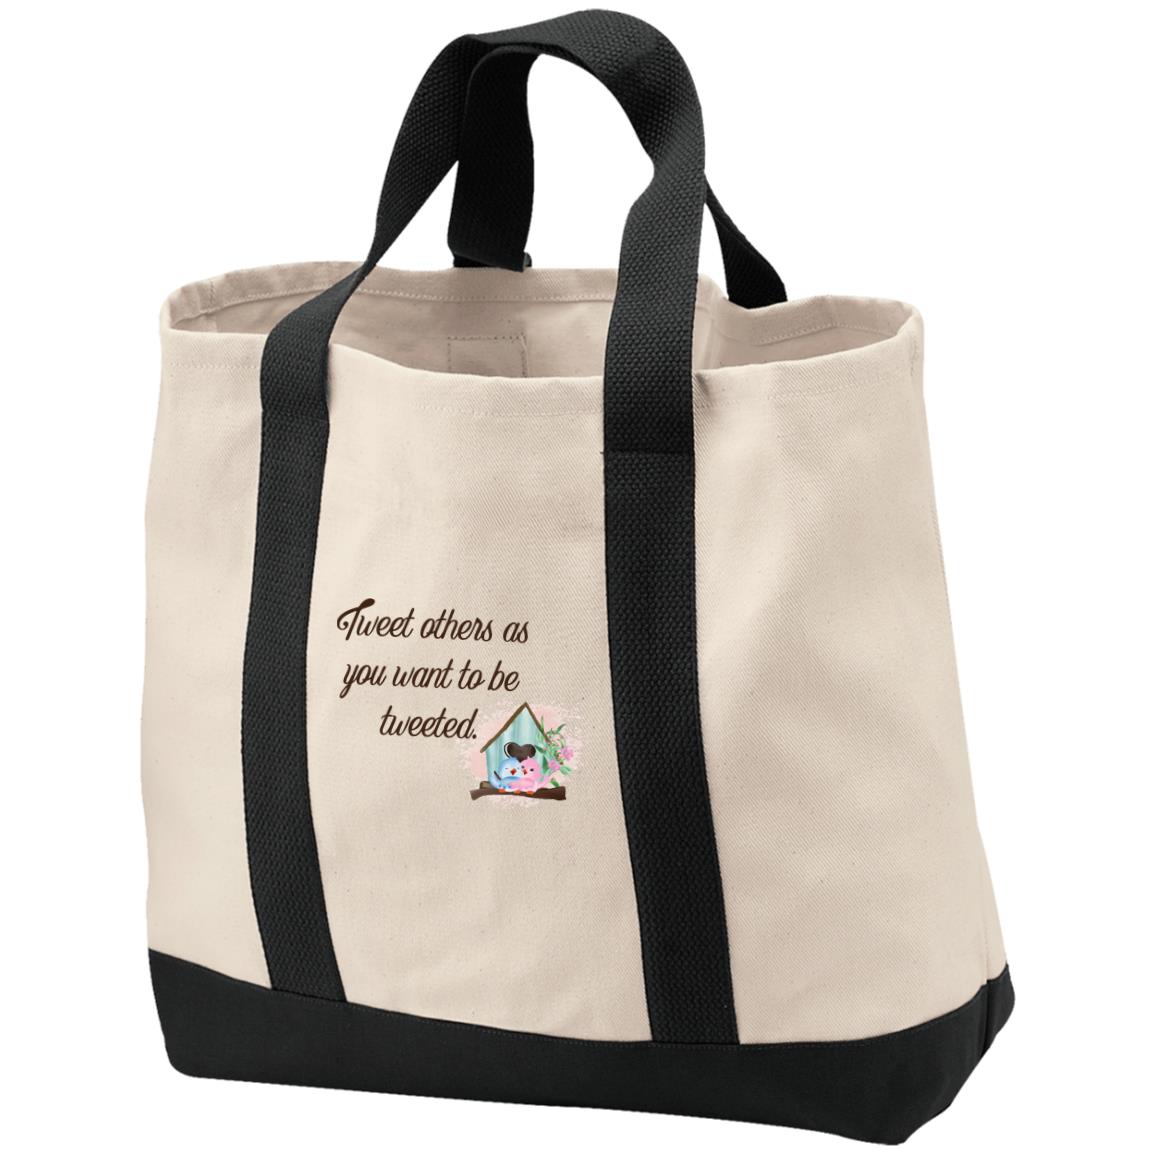 tweet others as you want to be tweeted tote bag